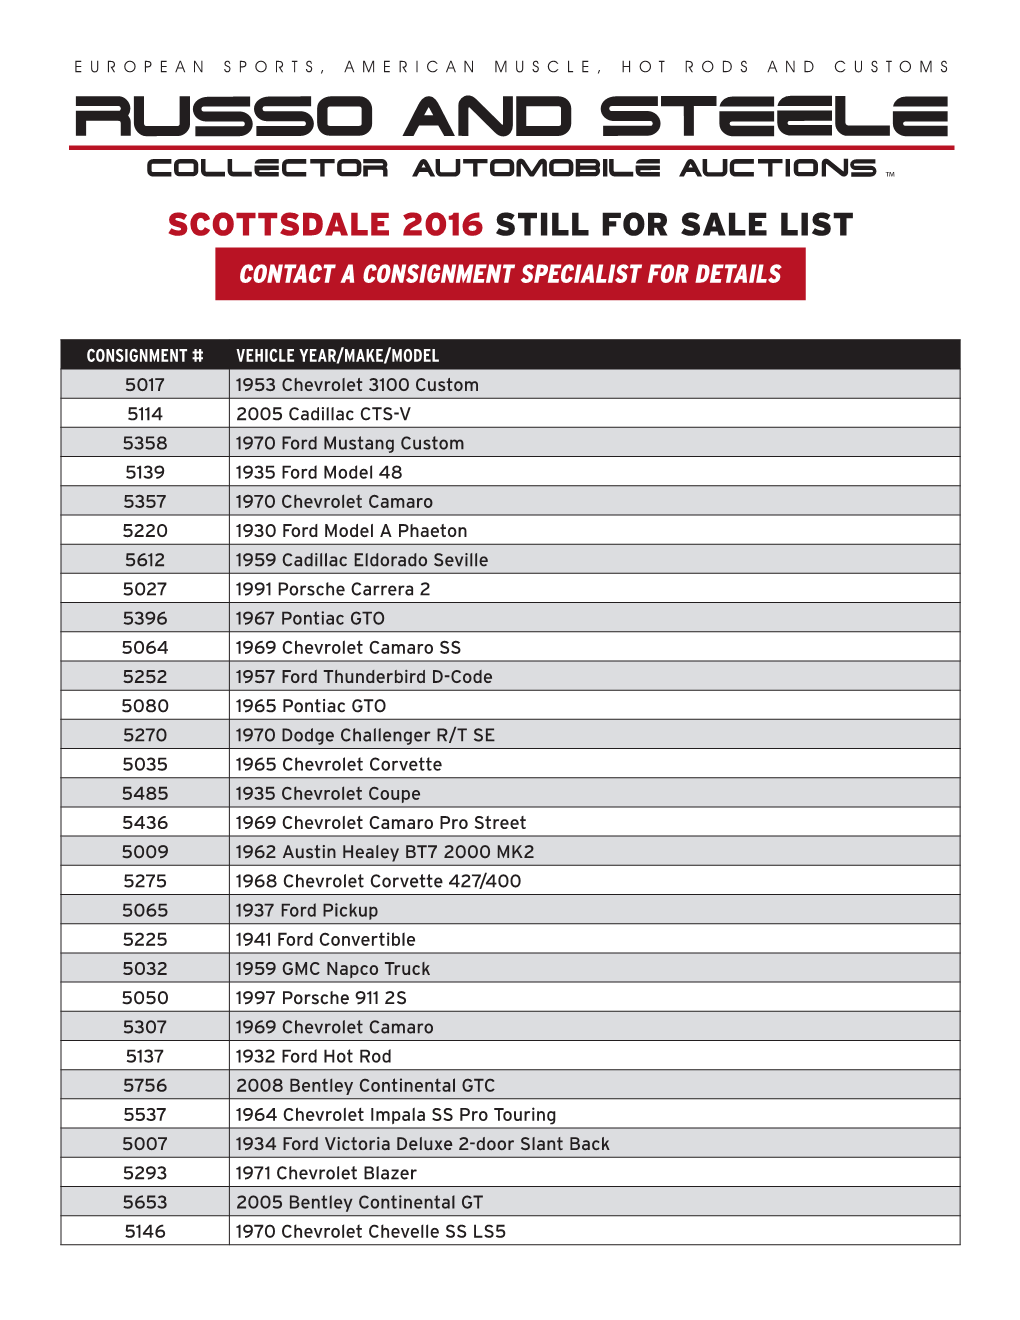 Scottsdale 2016 Still for Sale List Contact a Consignment Specialist for Details